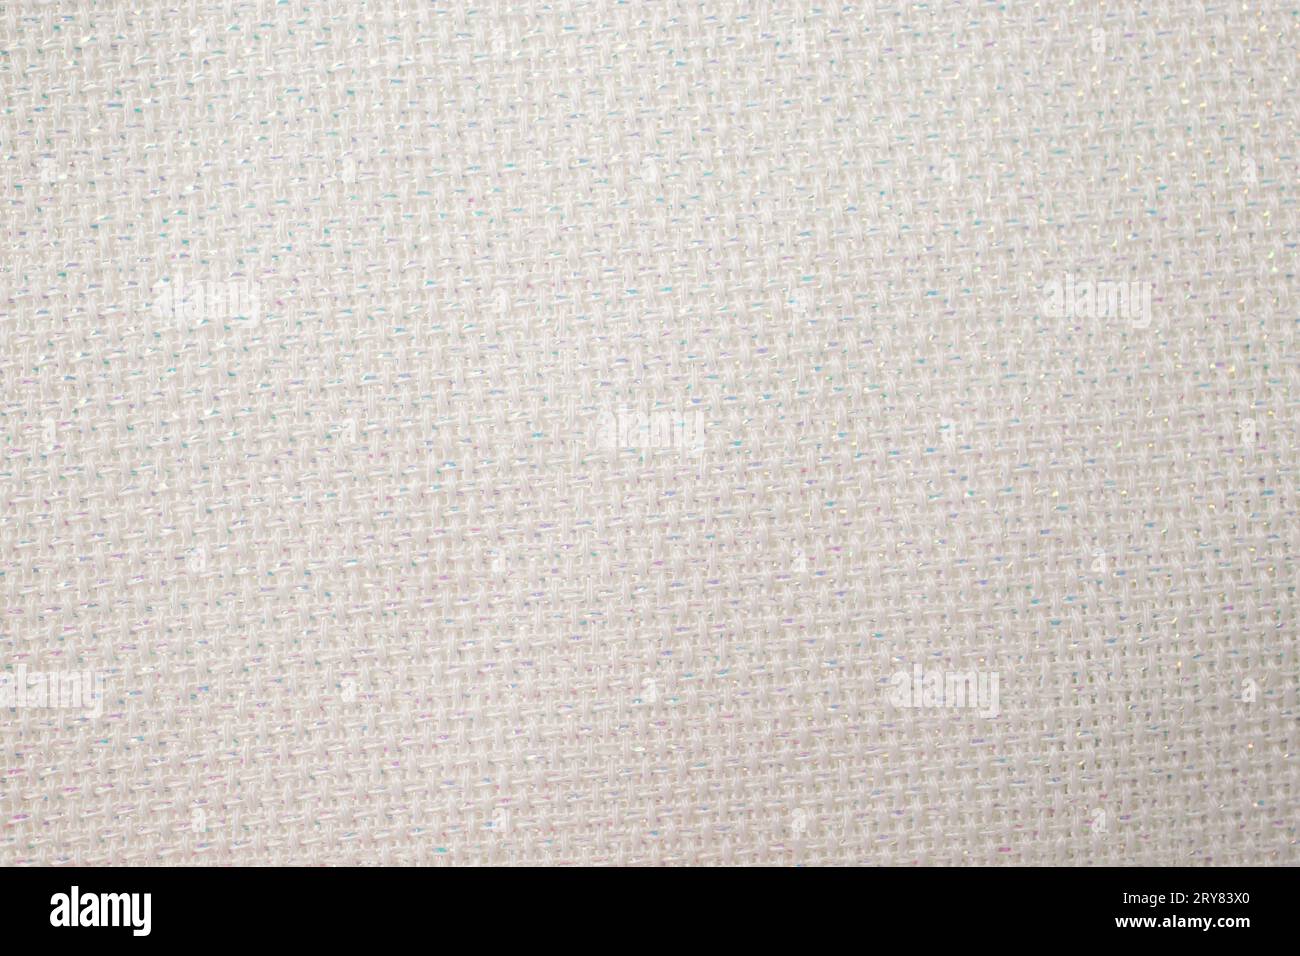 white canvas structure with metallic thread insertions, abstract empty backdrop Stock Photo